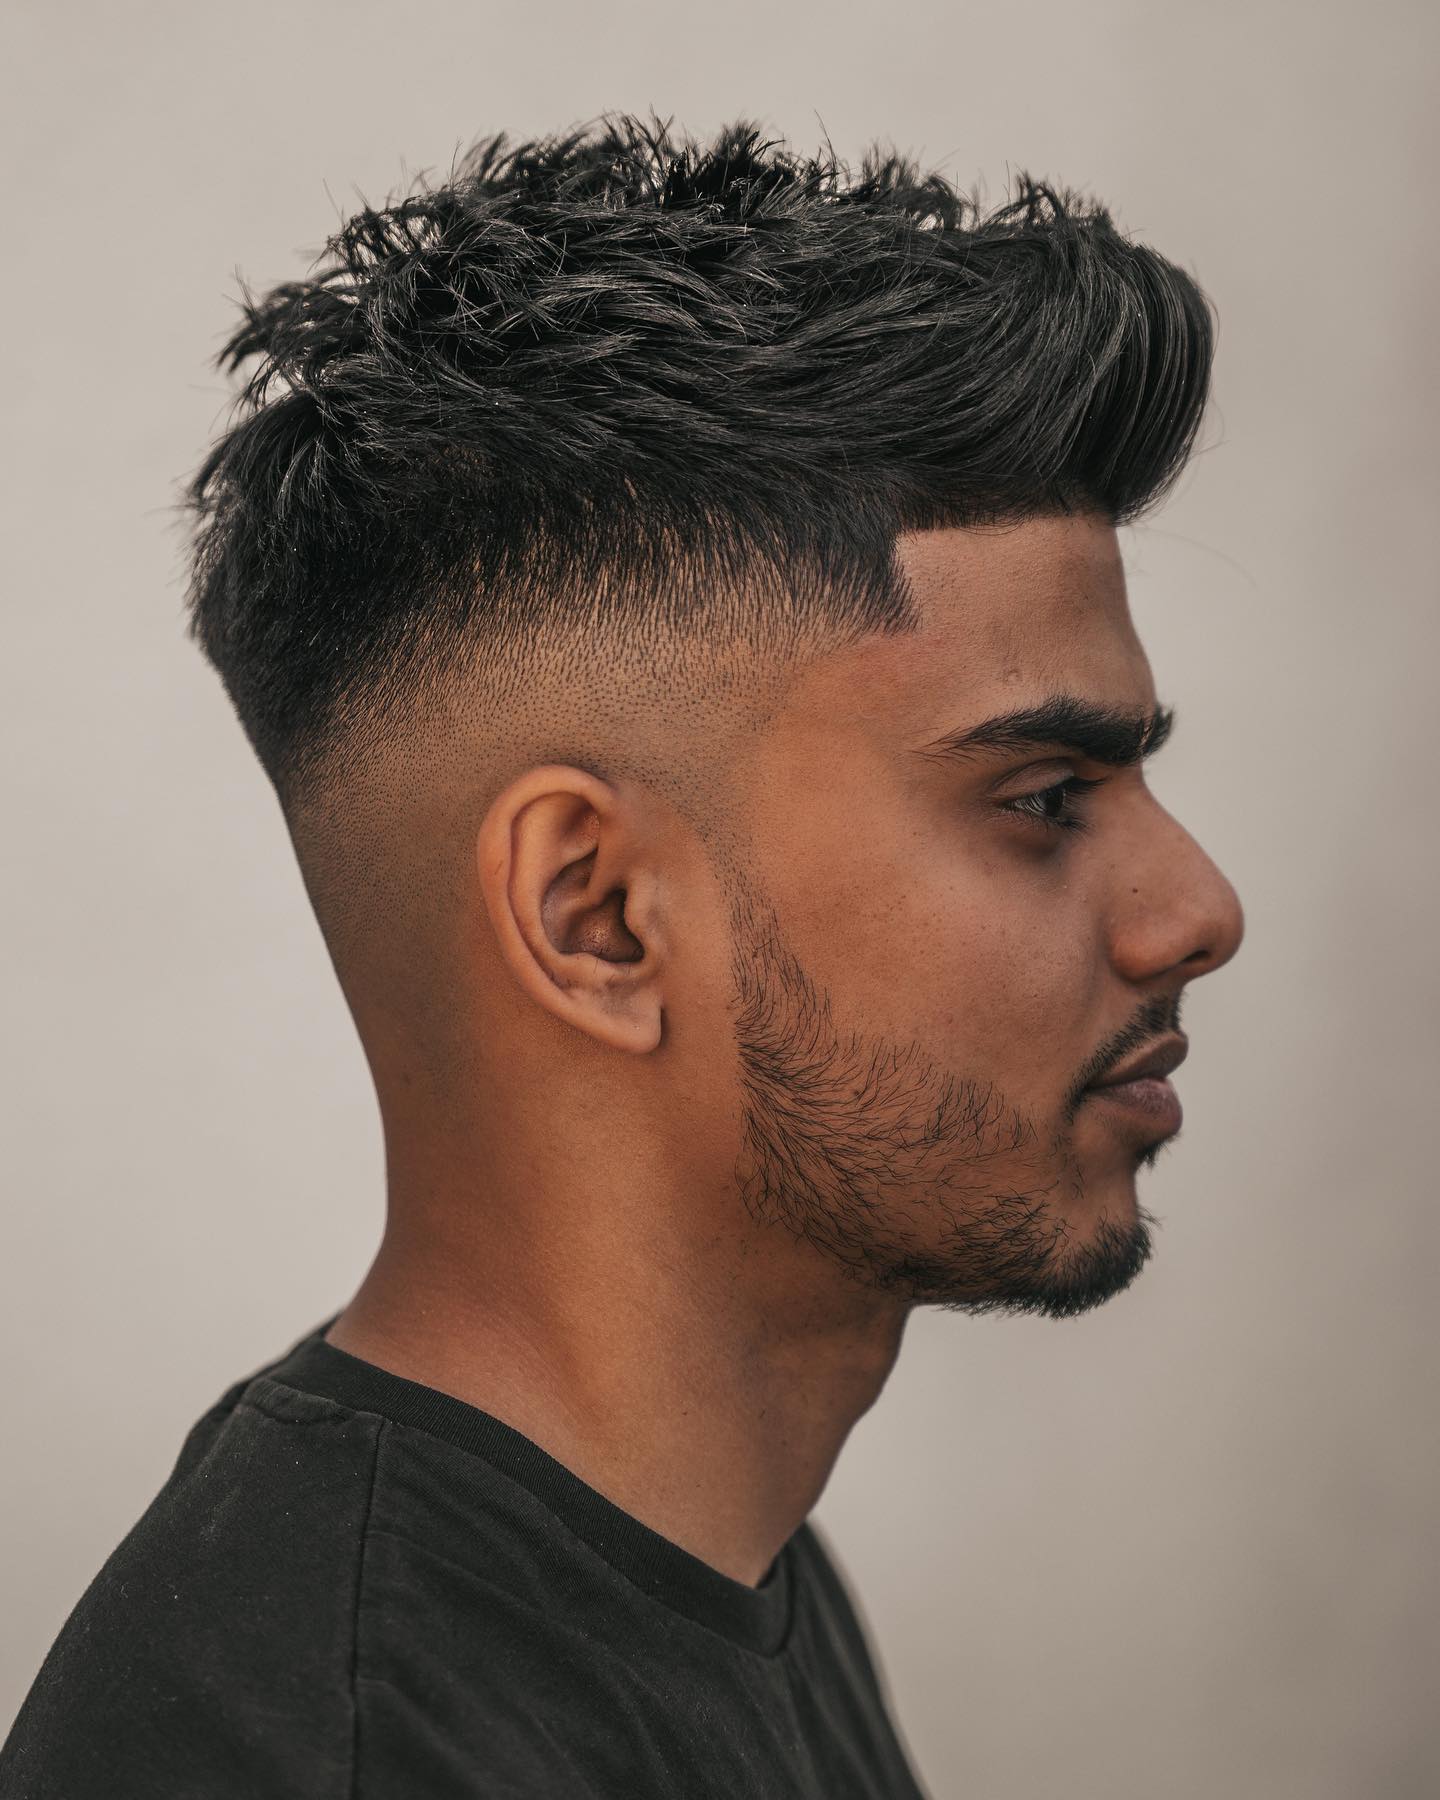 A MEN'S STYLING GUIDE TO THE MODERN QUIFF HAIRSTYLE